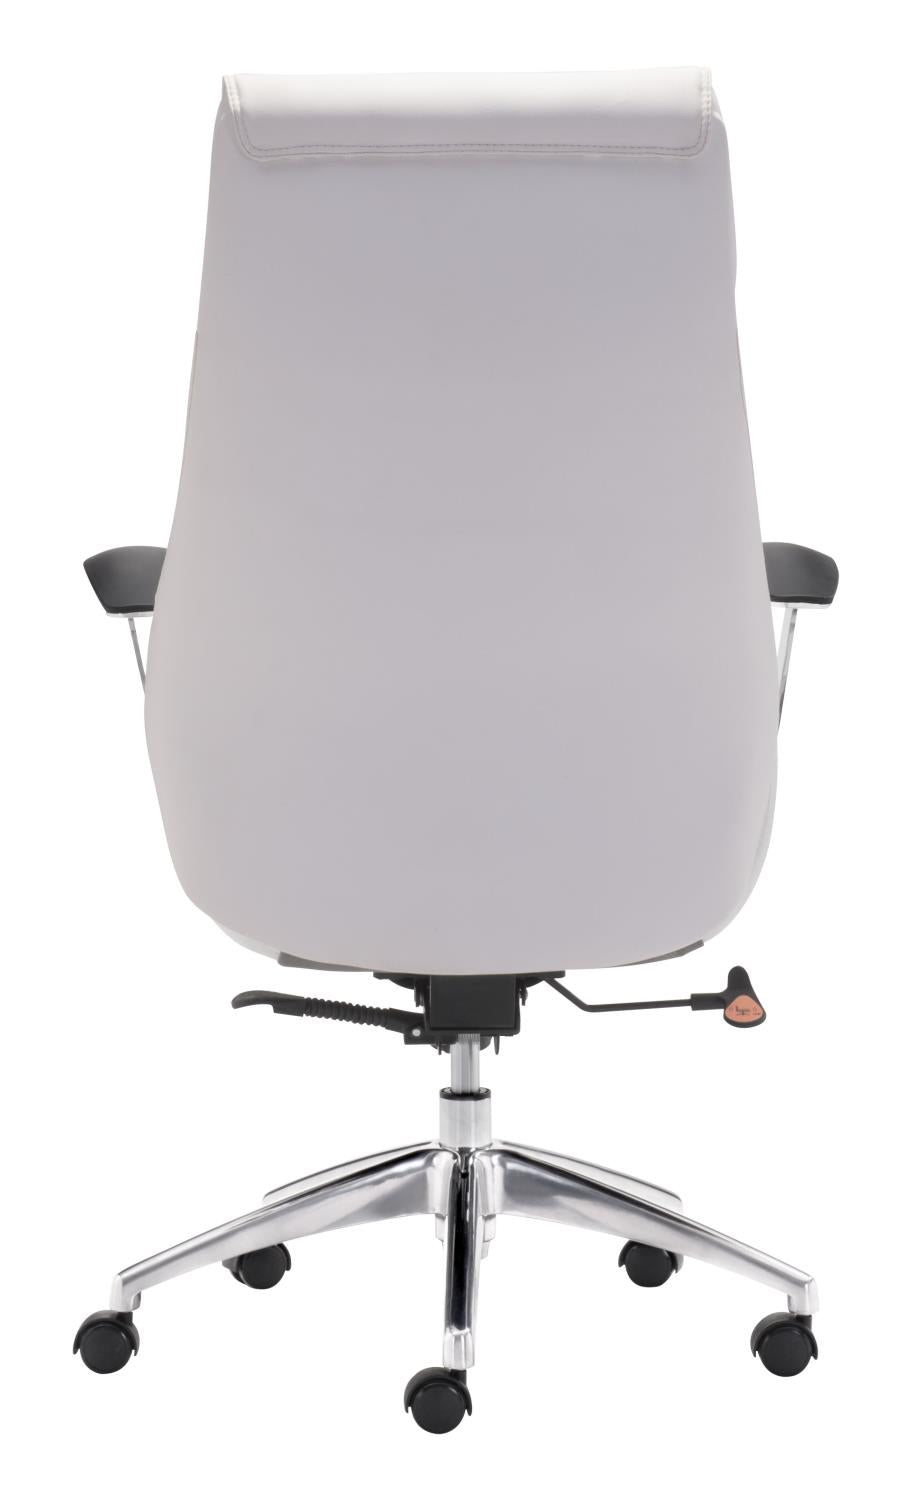 Verne Office Chair-White